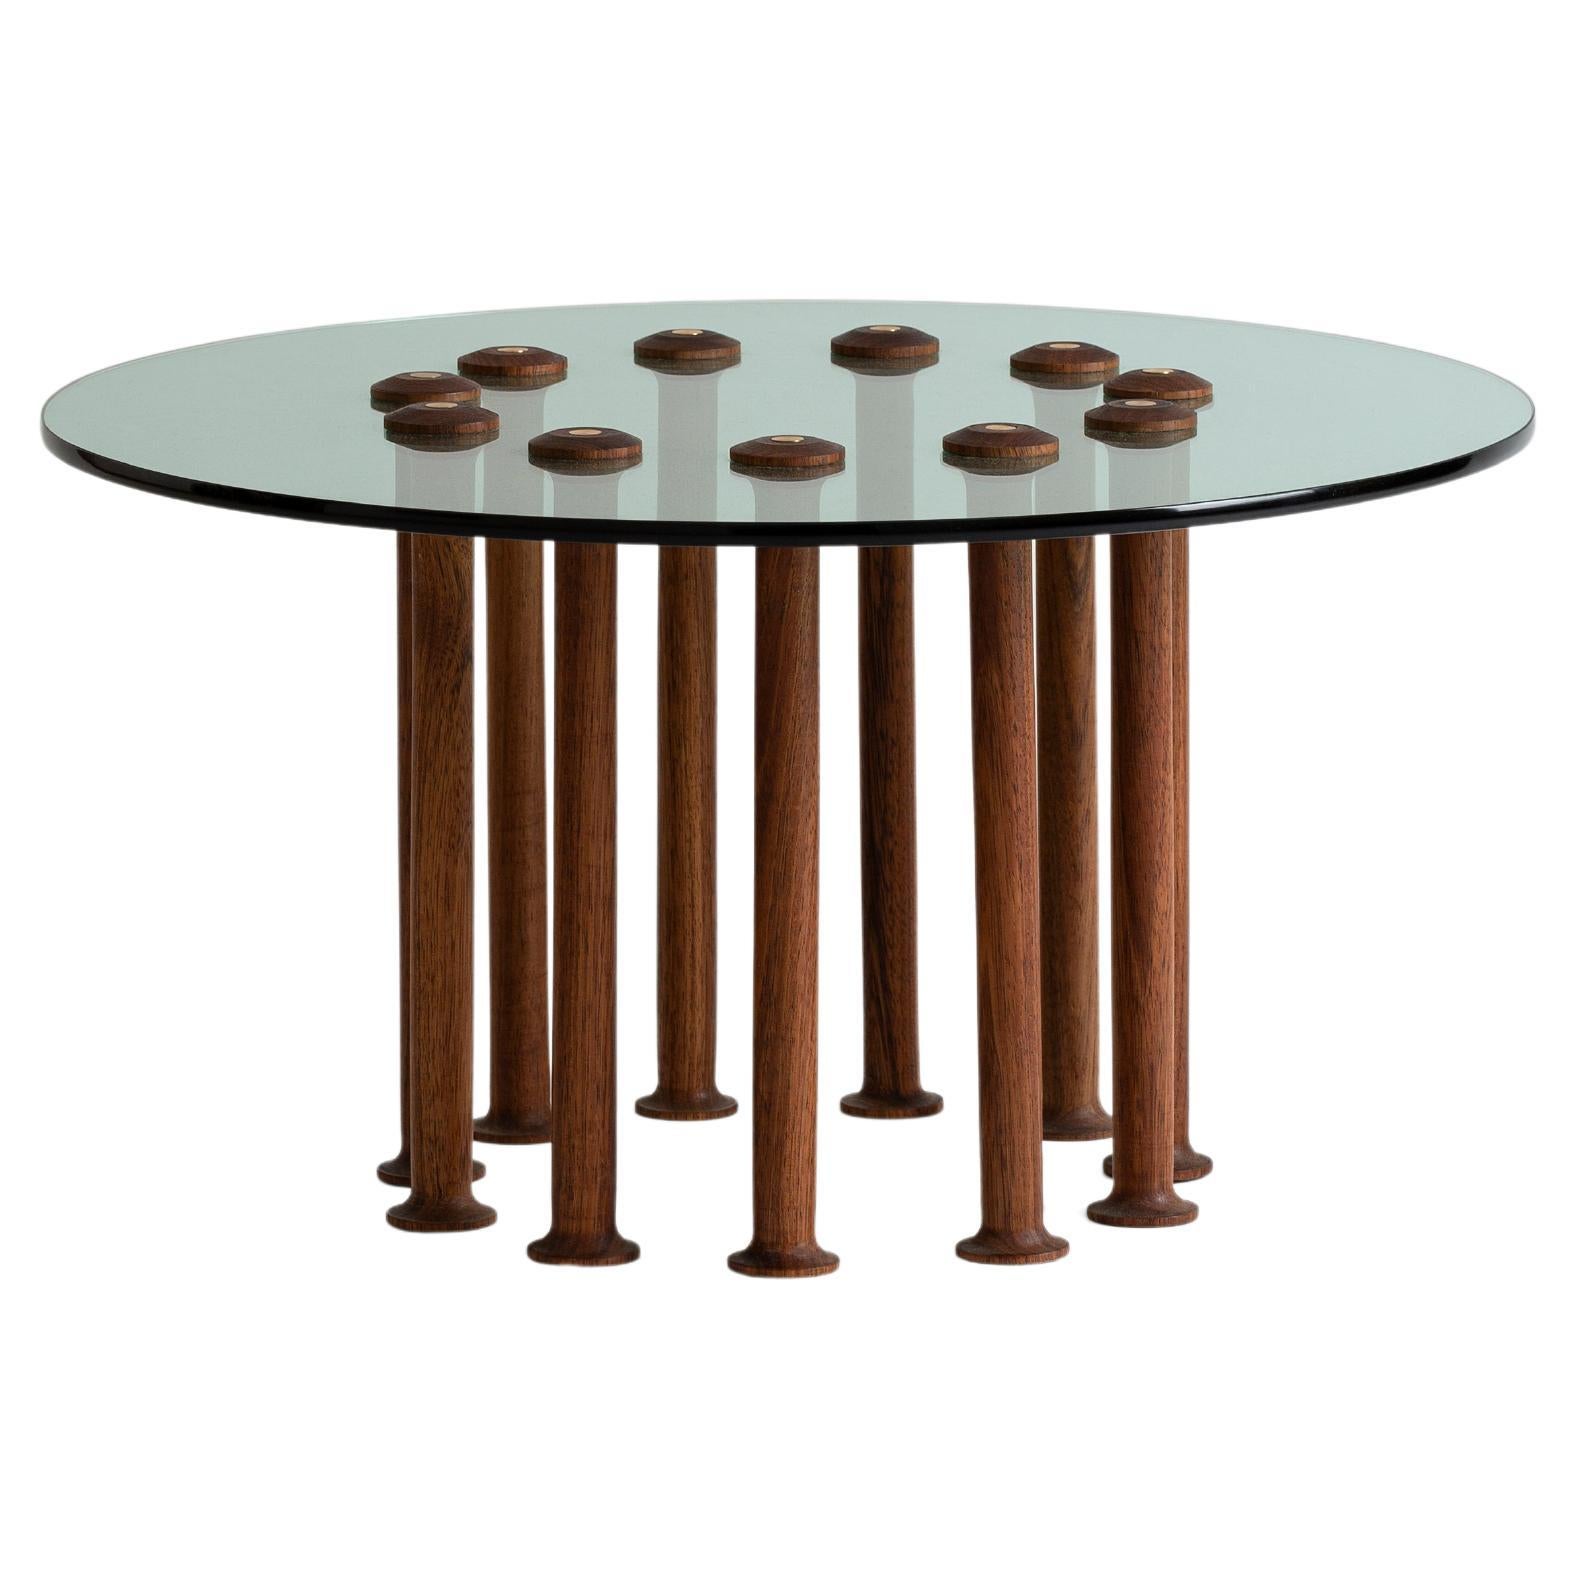 Contemporary Wood and Glass Coffee Table "Molinillo 211" by Colección Estudio For Sale